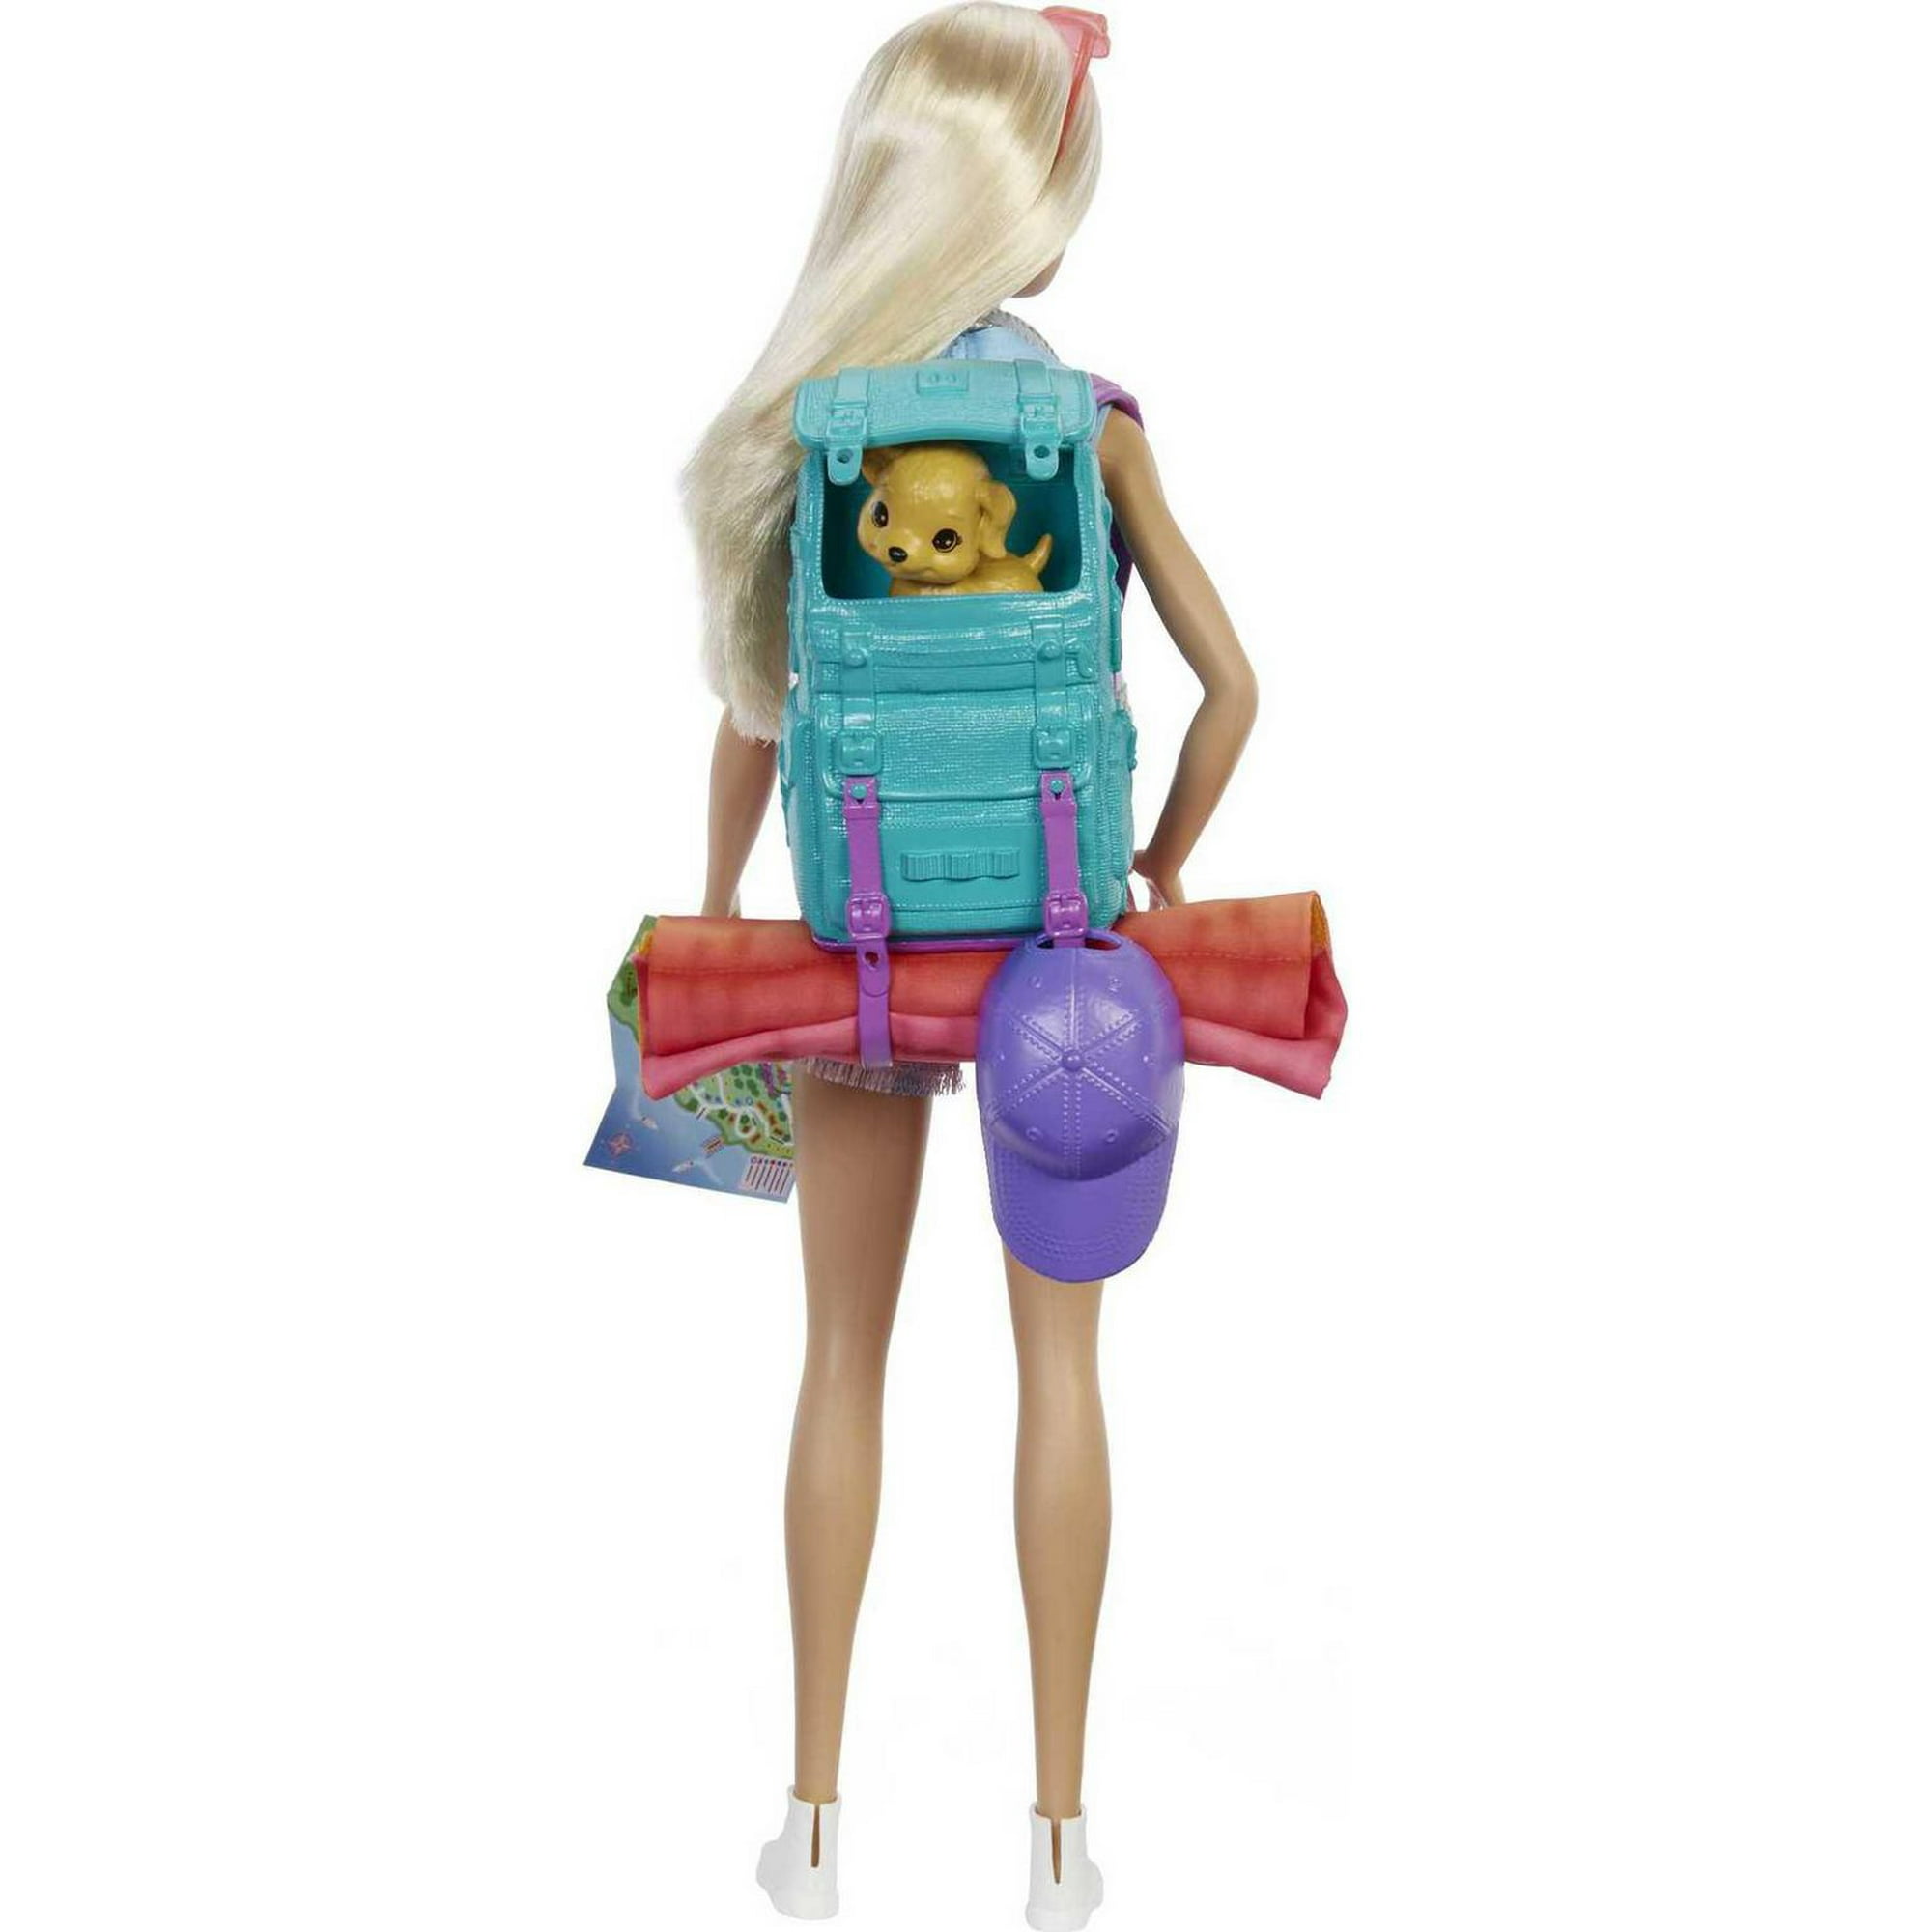 Barbie It Takes Two “Malibu” Camping Doll (11.5 in Blonde) with Pet Puppy,  Backpack, Sleeping Bag & 10 Camping Accessories, Gift for 3 to 7 Year Olds, Ages  3+ 